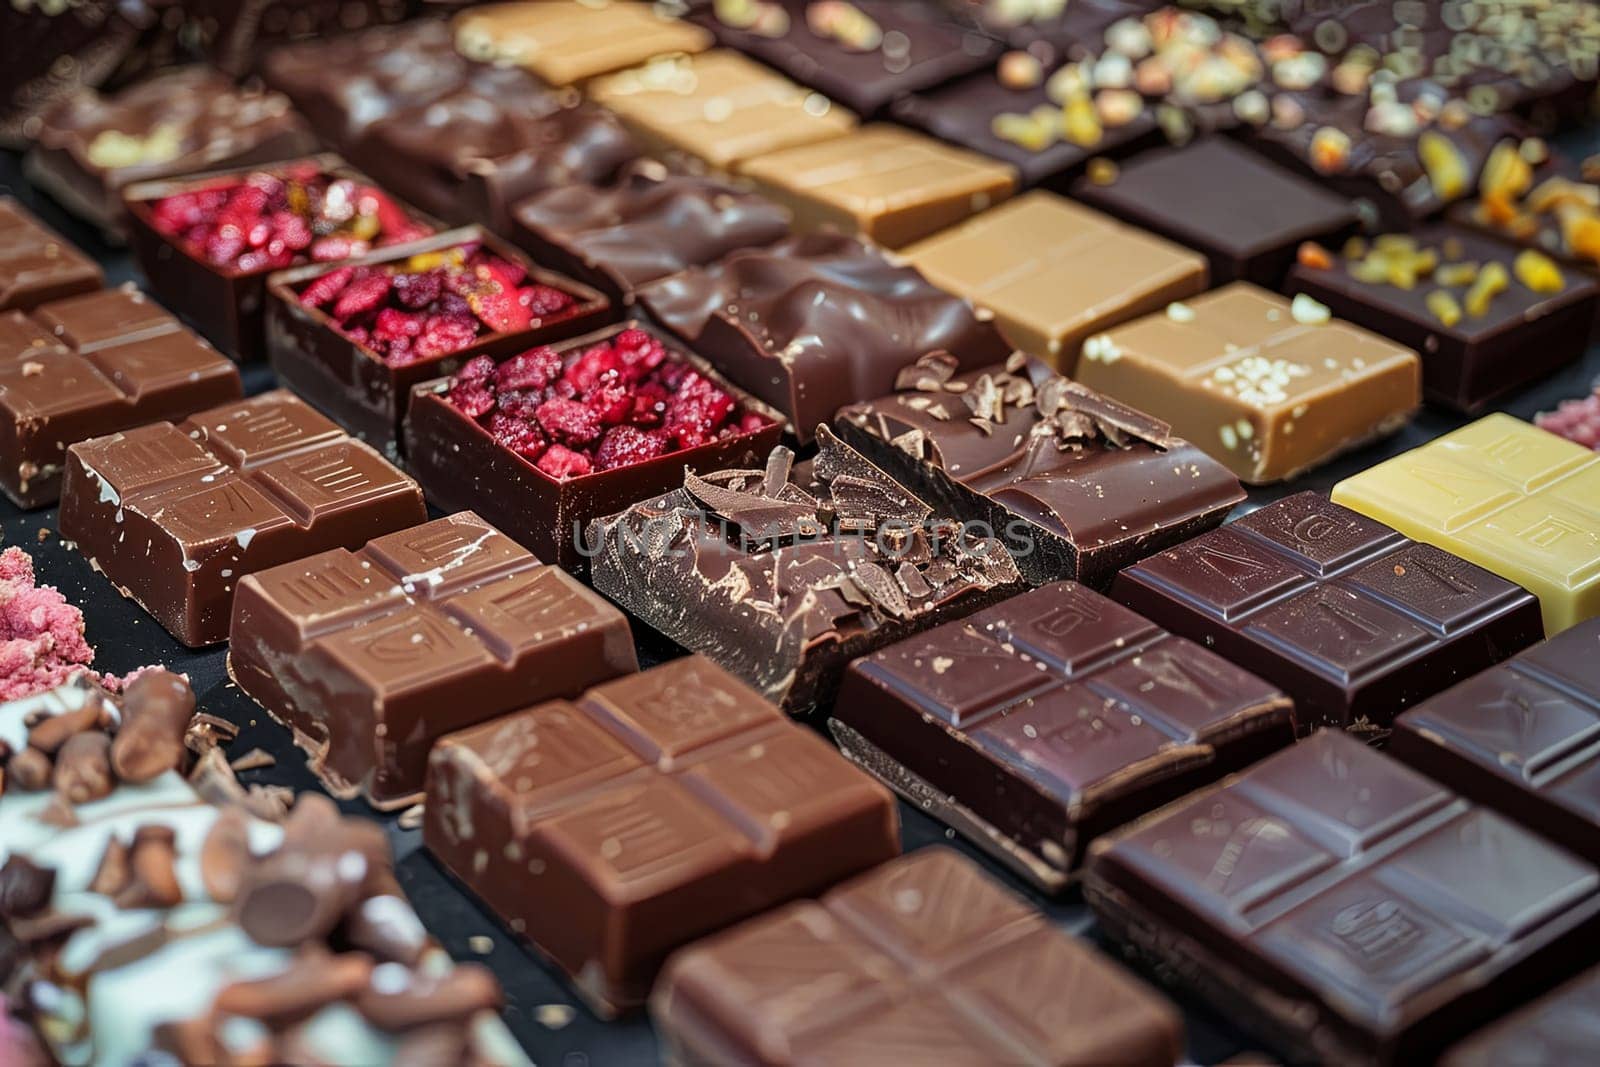 Various chocolate bars of different flavors and types neatly arranged on a table.